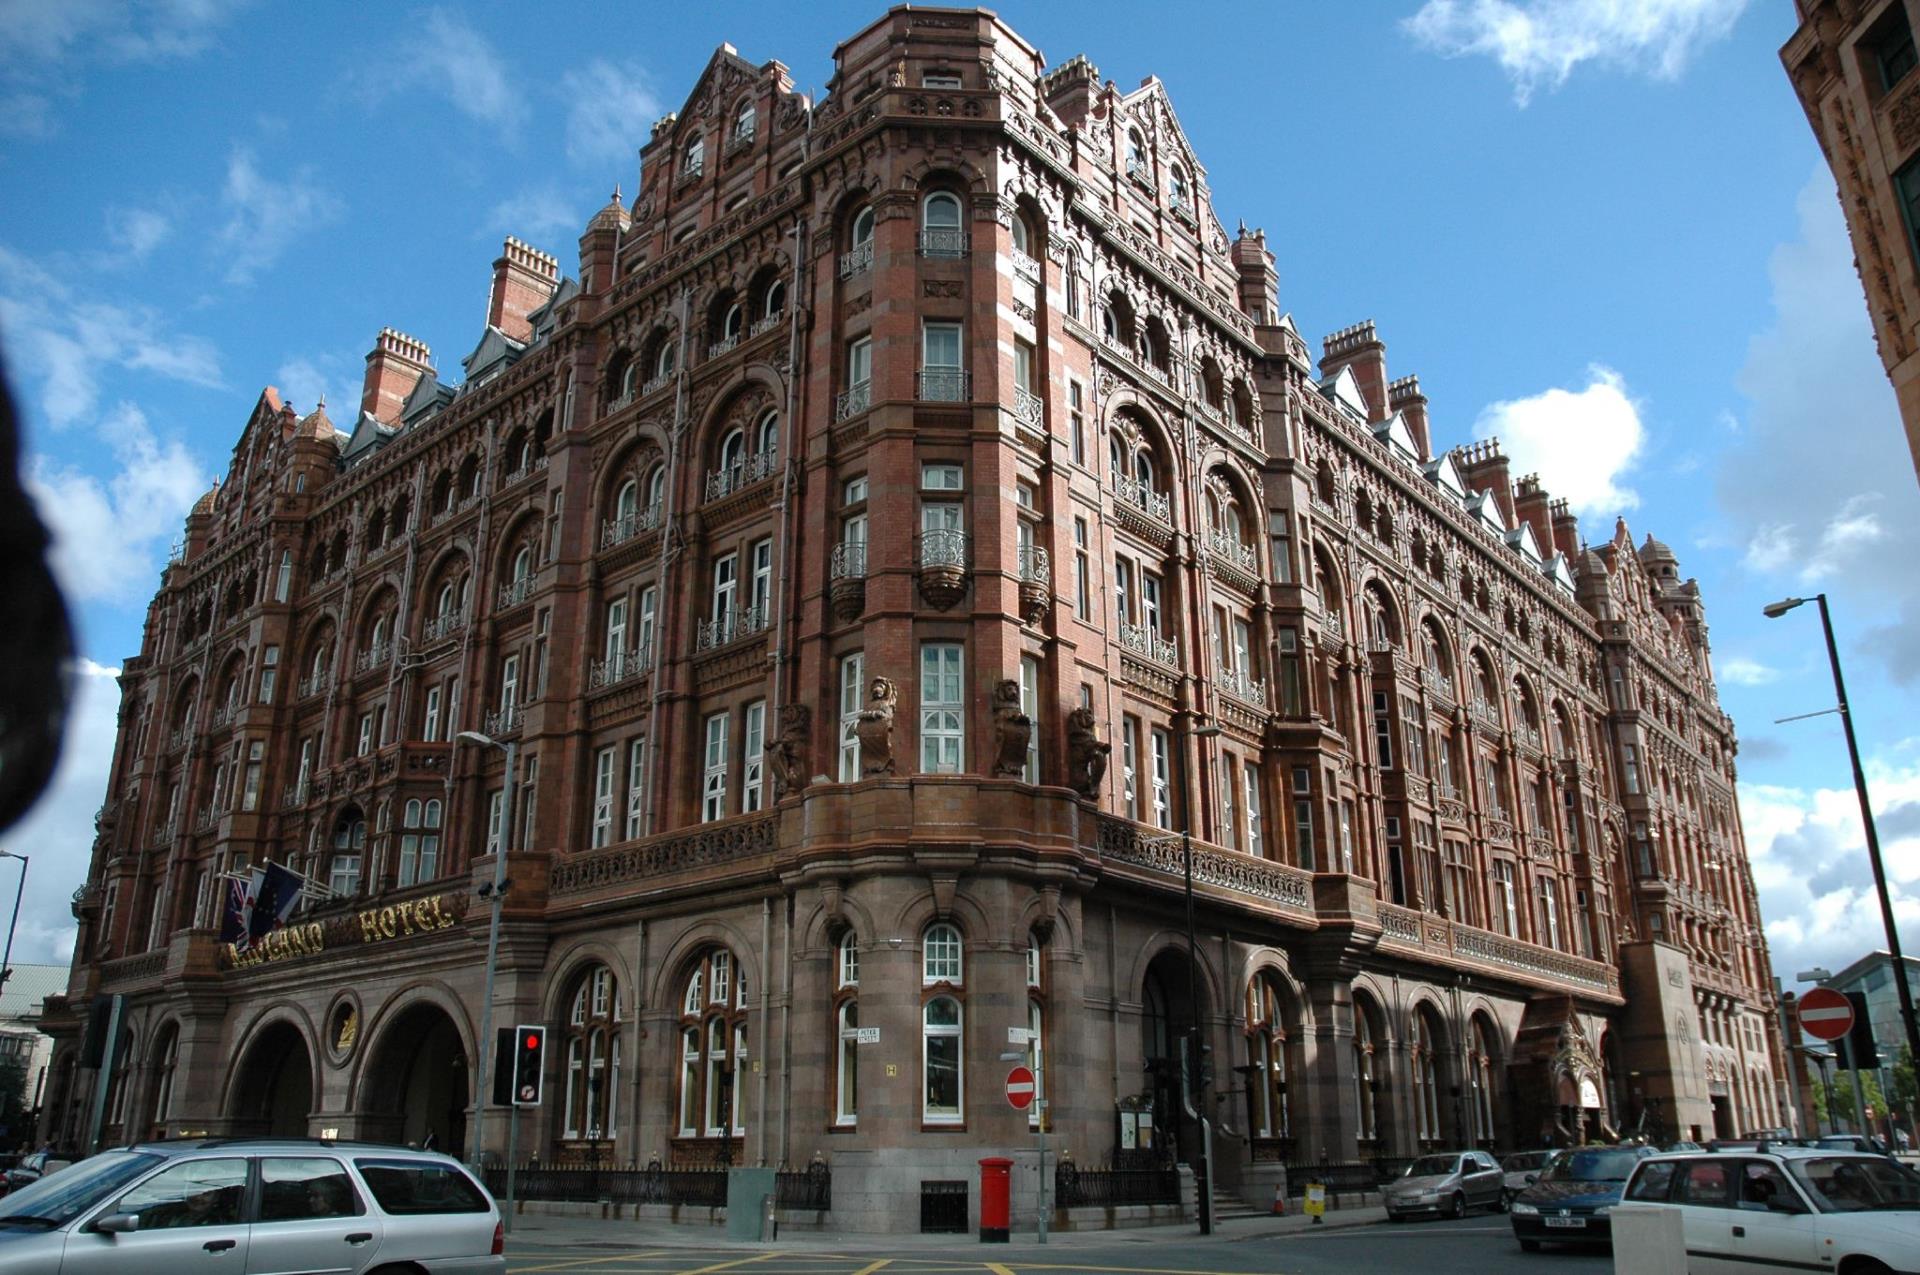 Picture of the Midland Hotel - Manchester